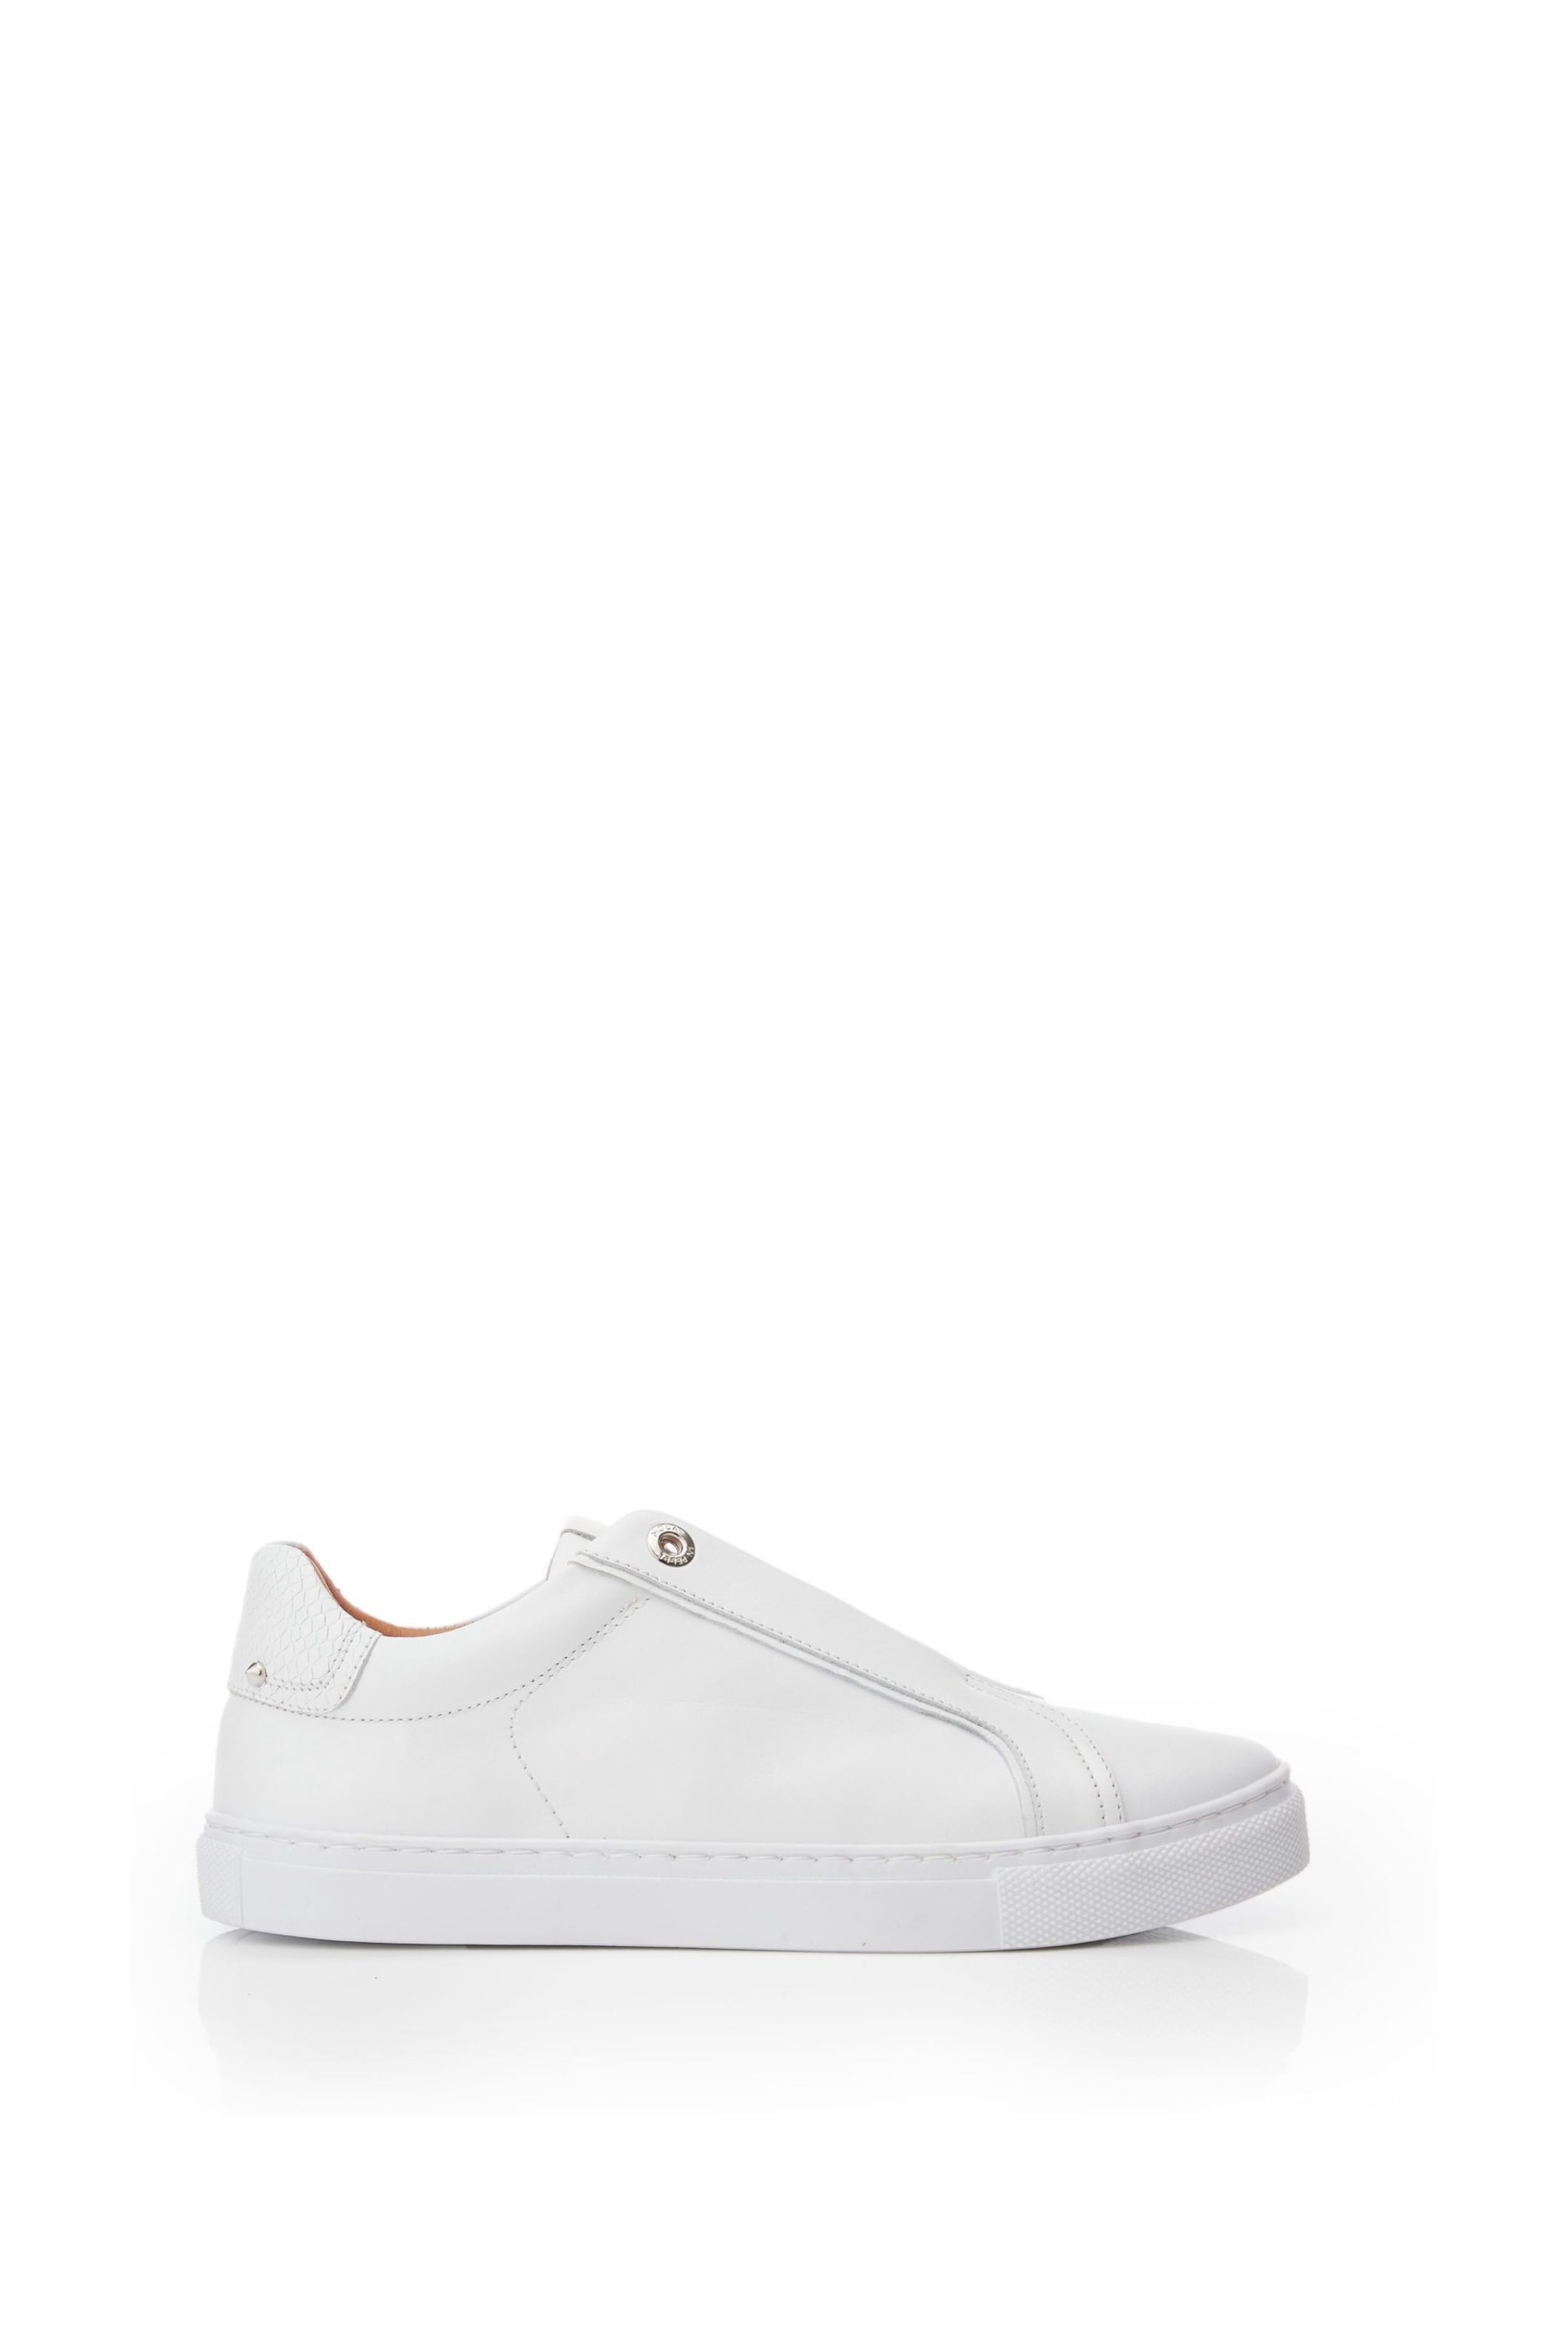 Moda in Pelle Bencina Slip On White Trainers with Elastic - Image 1 of 5